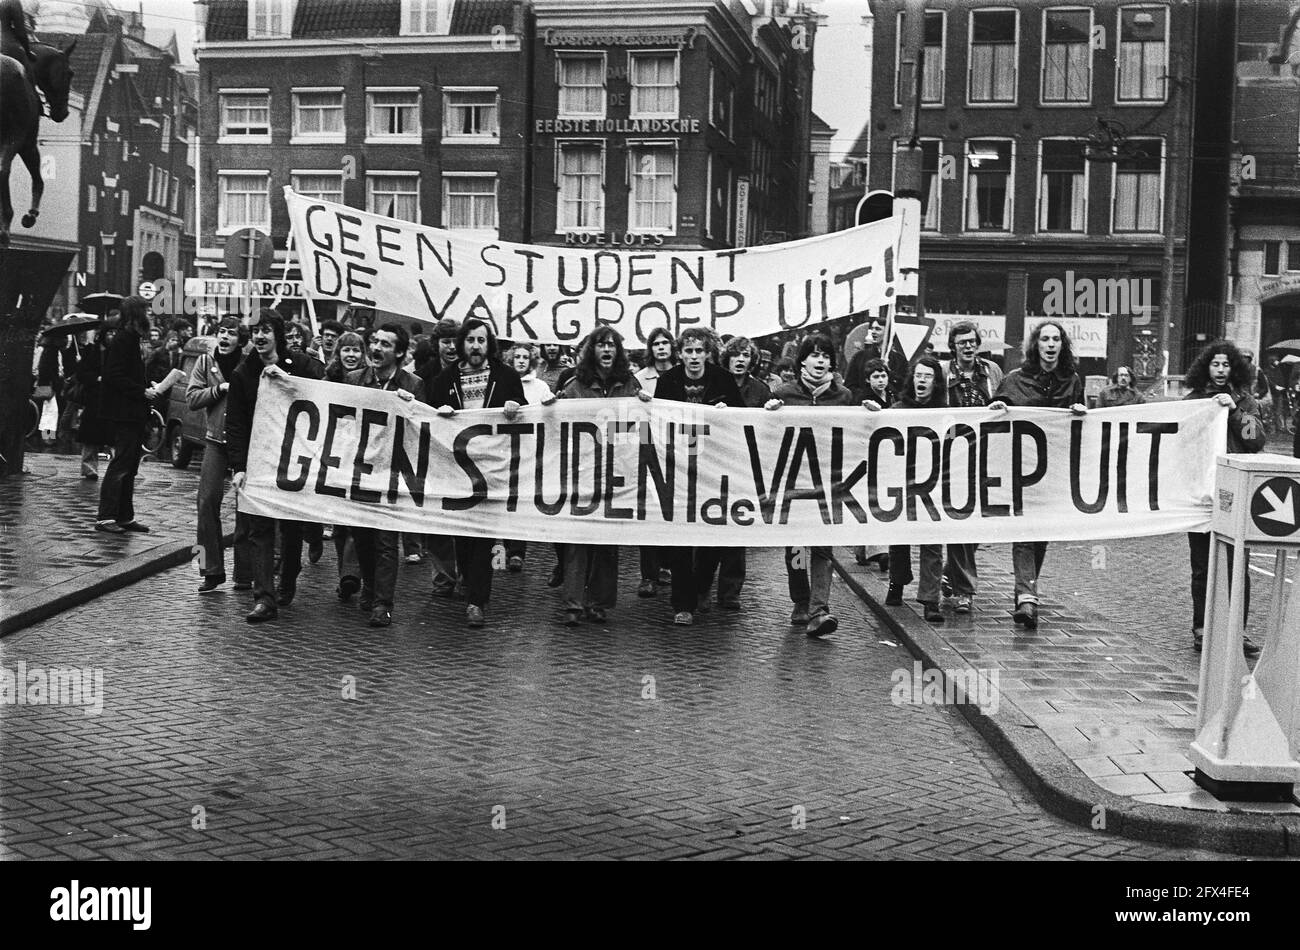 Demonstration occupiers Maagdenhuis, April 27, 1978, occupation, demonstrations, The Netherlands, 20th century press agency photo, news to remember, documentary, historic photography 1945-1990, visual stories, human history of the Twentieth Century, capturing moments in time Stock Photo